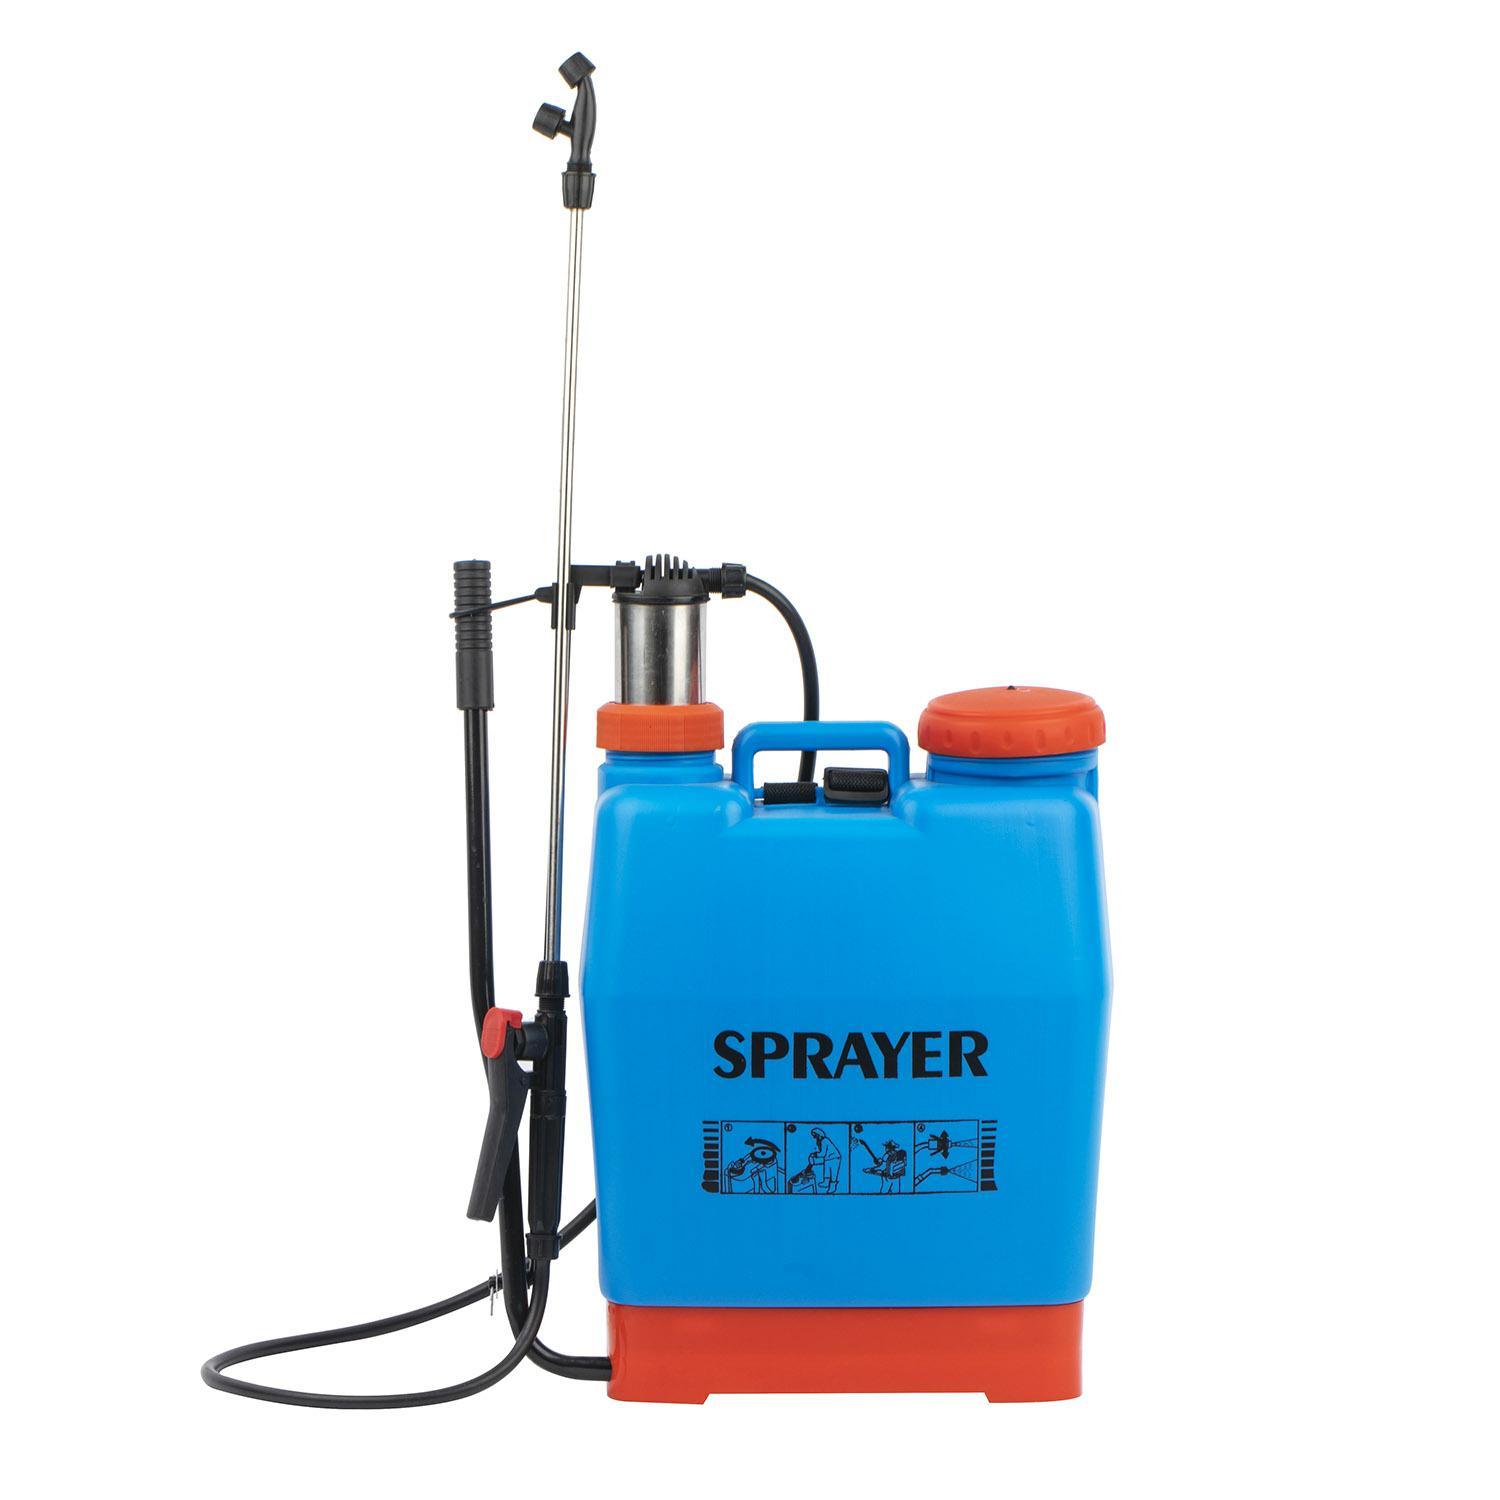 How do I maintain and care for my battery sprayer?